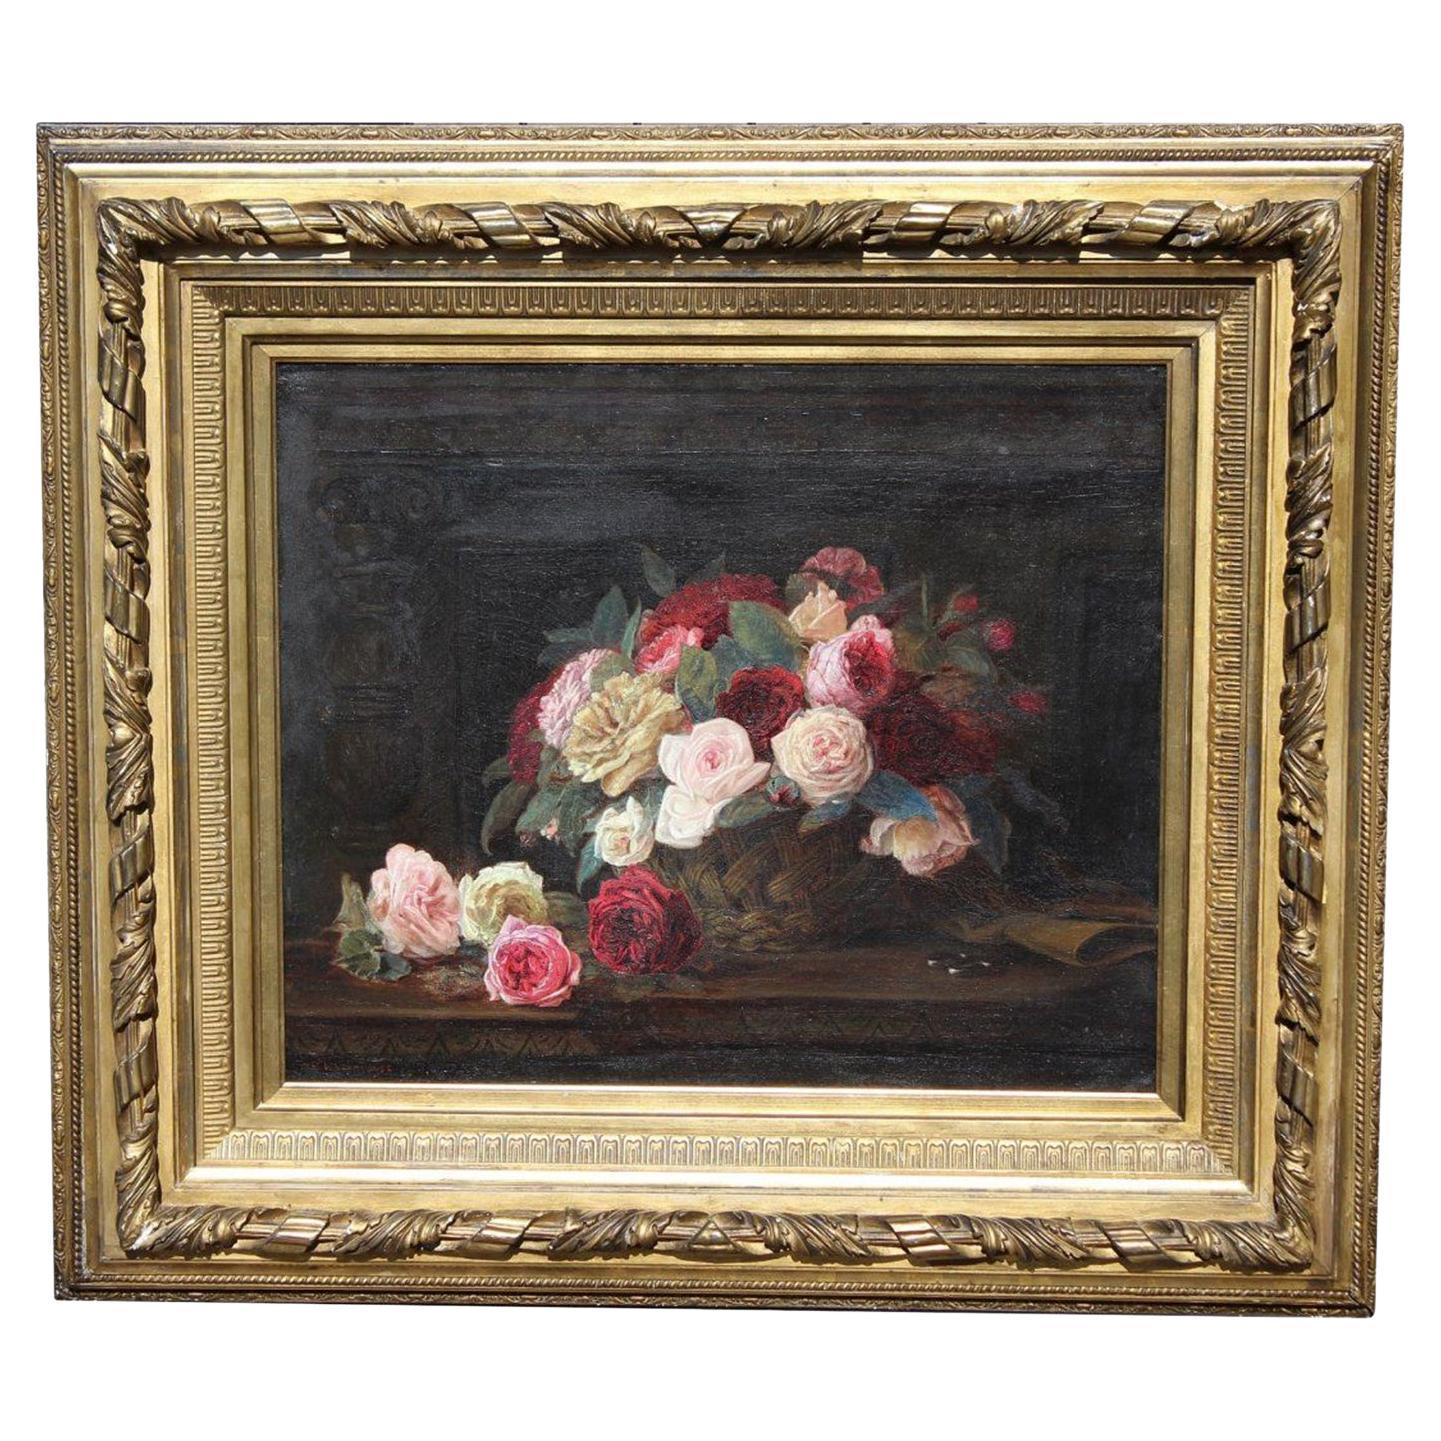 19th Century English Oil Painting with Flowers by John William Waterhouse